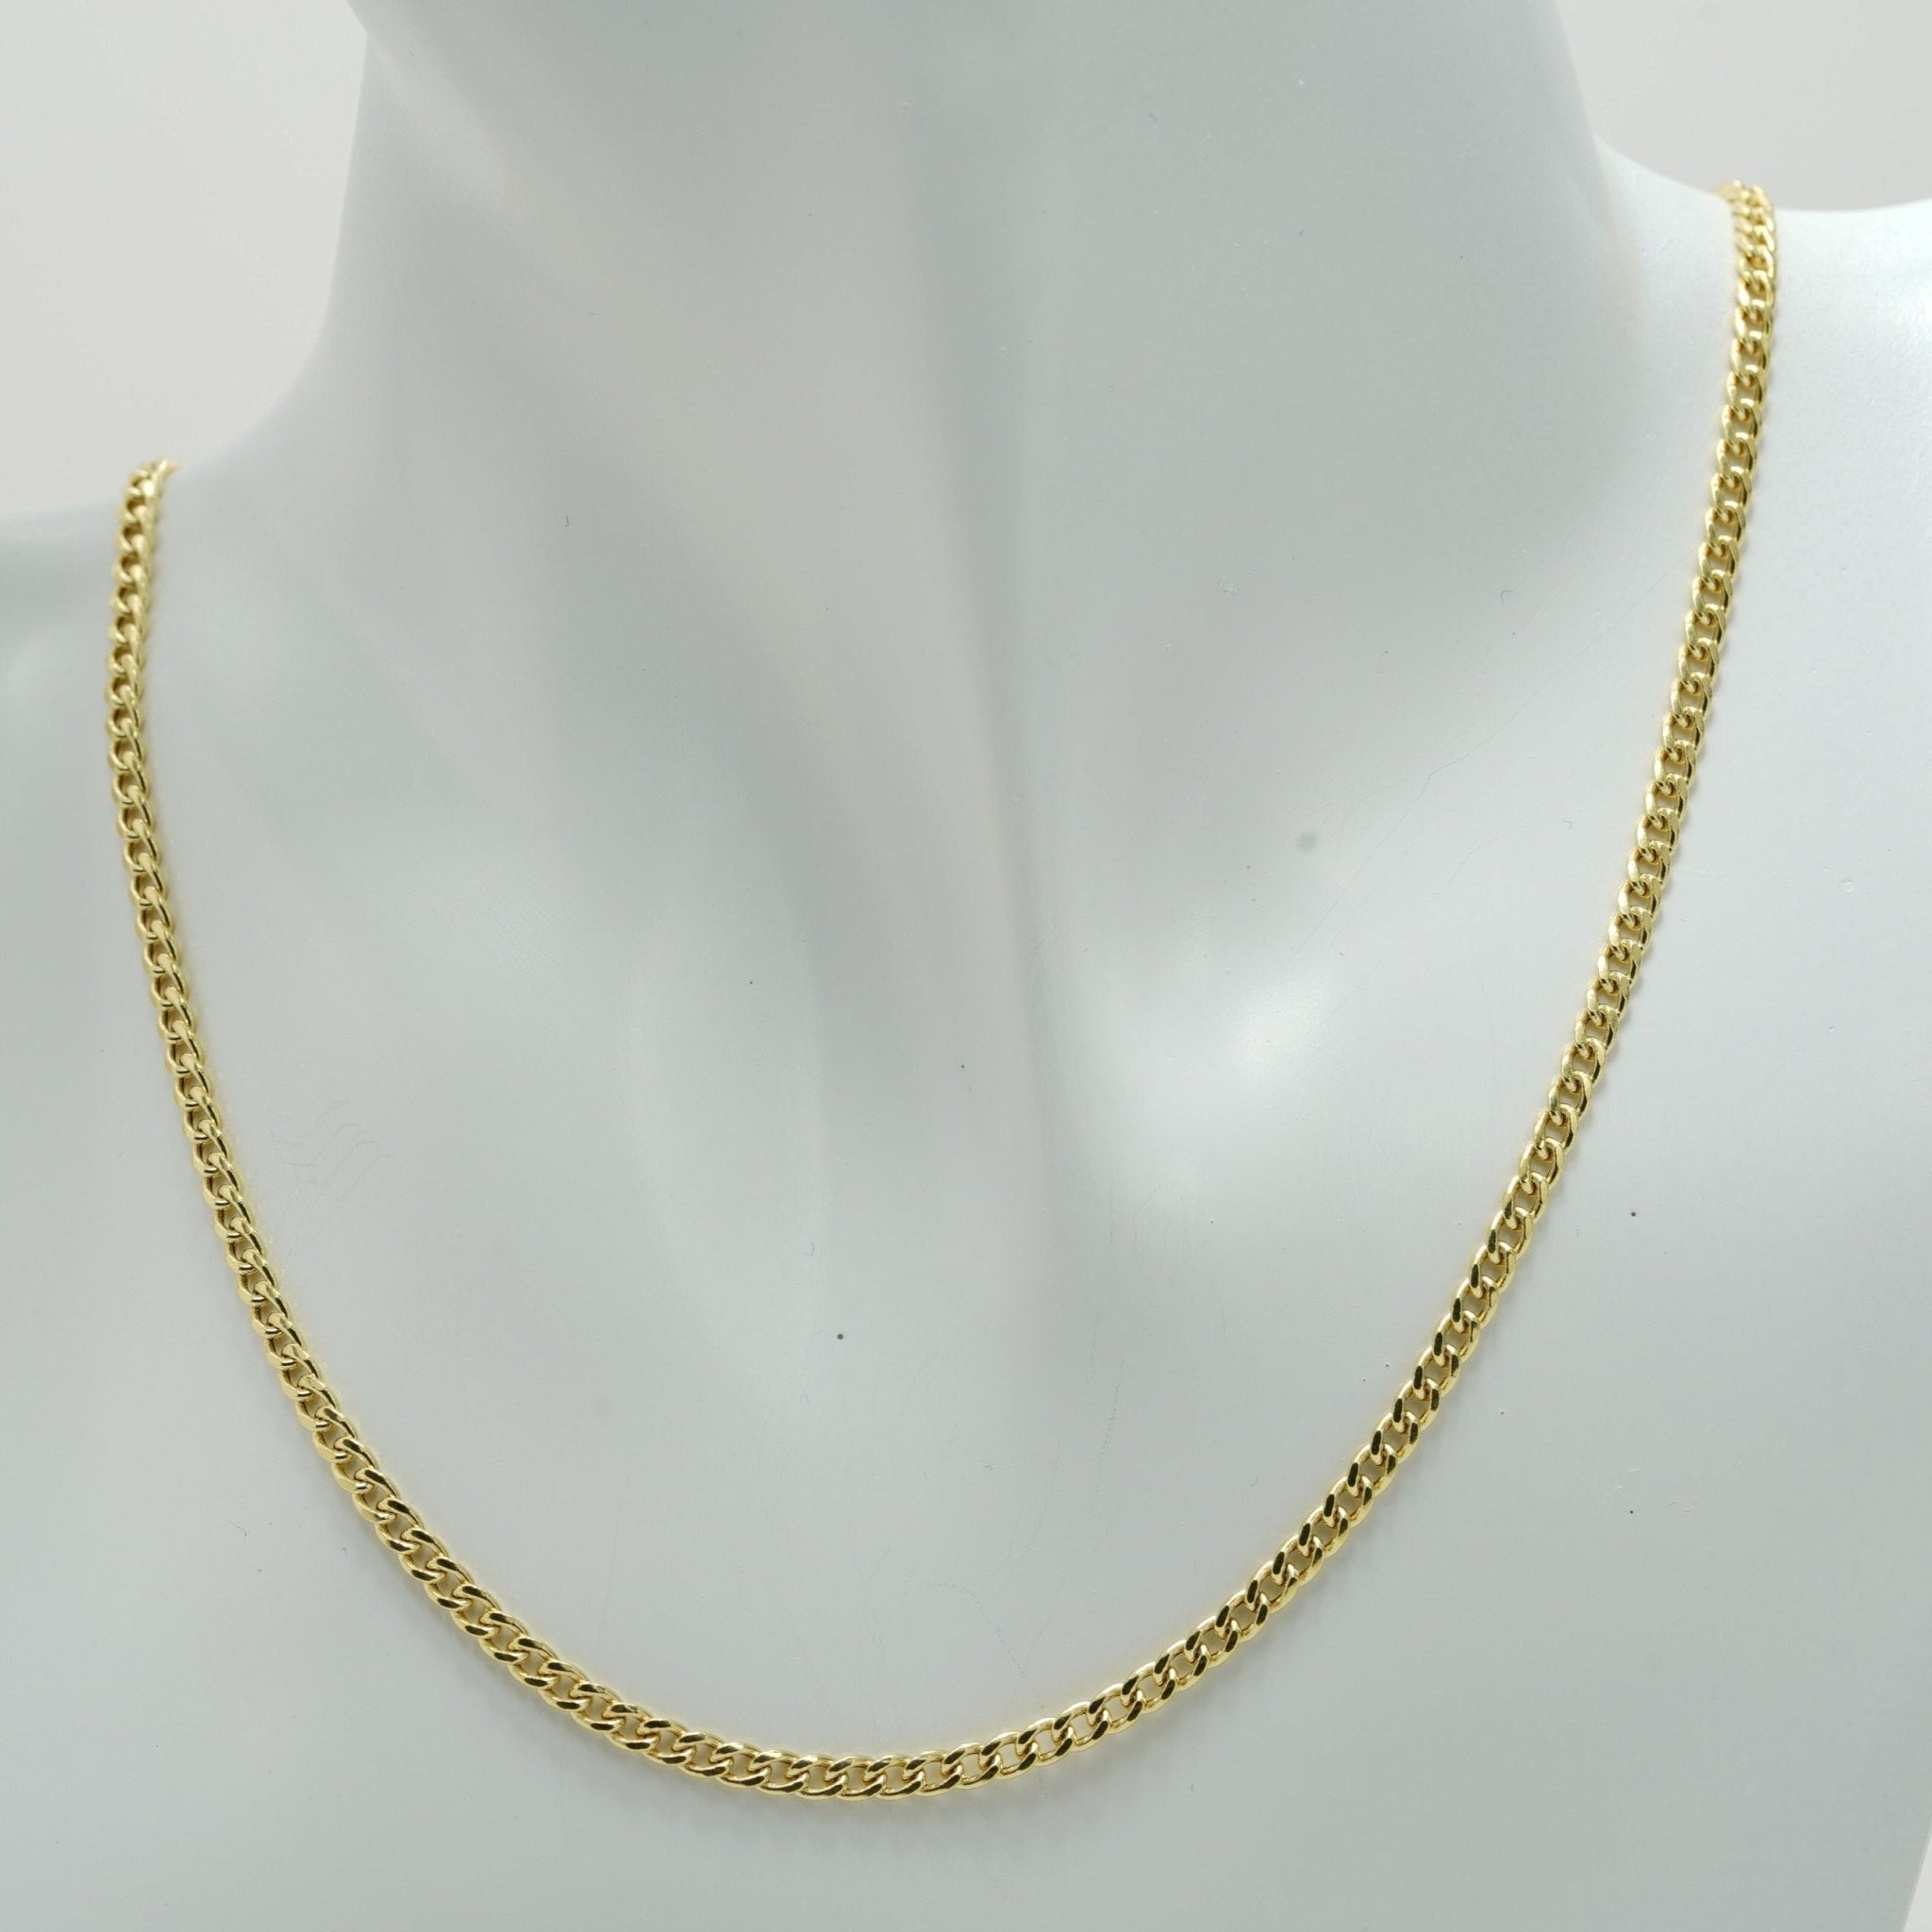 22k certified yellow gold handmade gorgeous link chain 7 mm 20 inches long chain  necklace india jewelry ch188 | TRIBAL ORNAMENTS